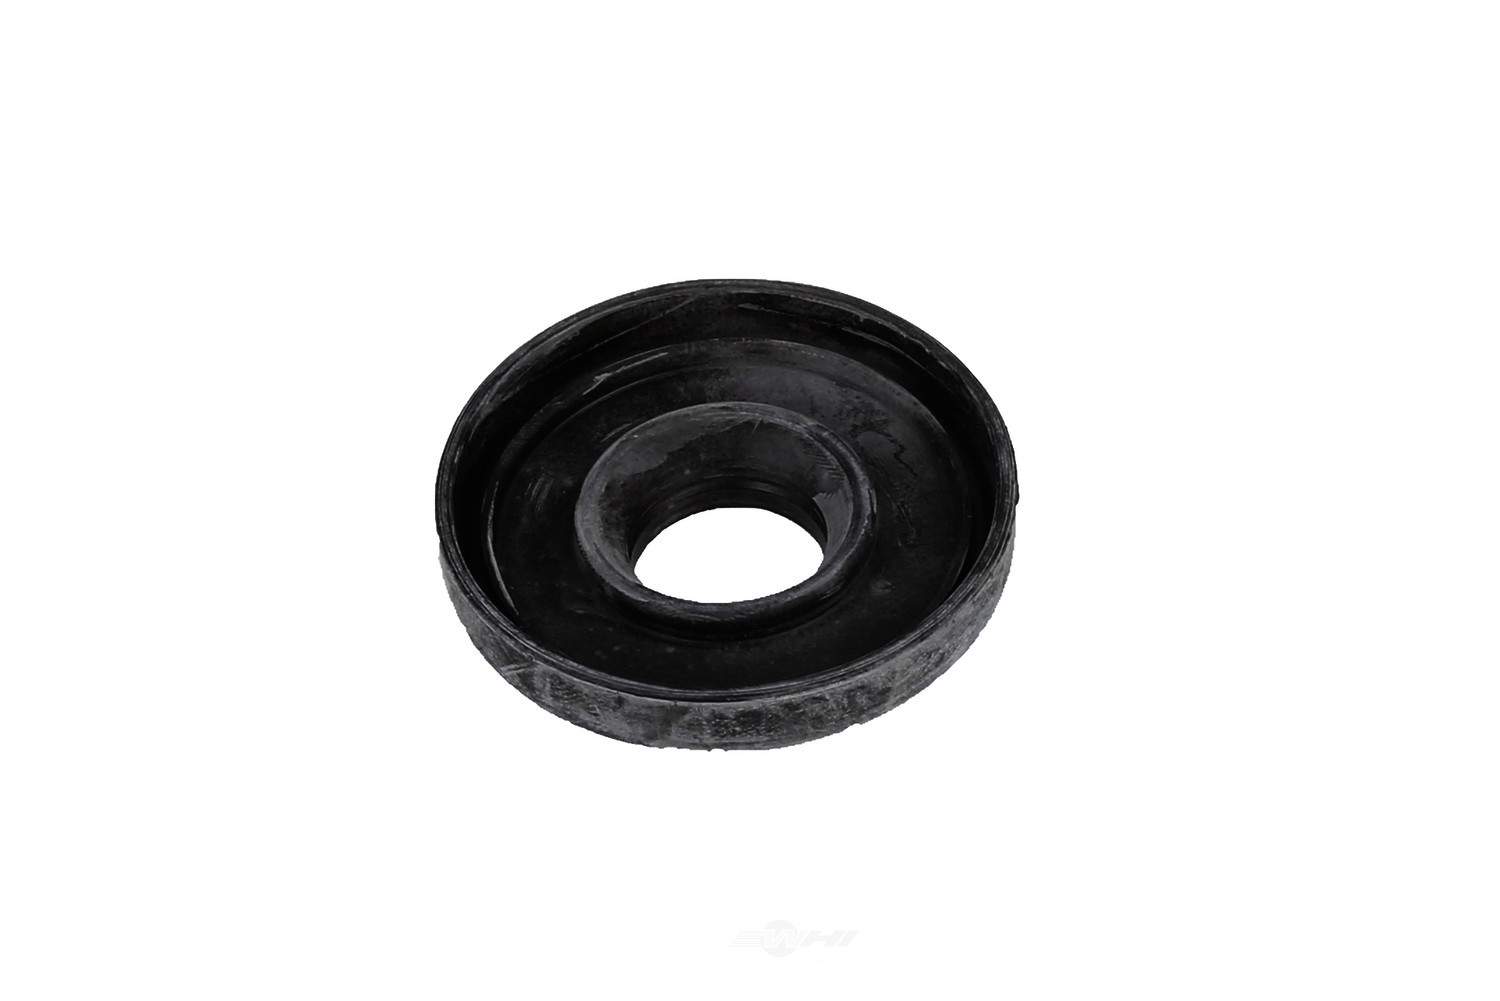 GM GENUINE PARTS - Steering Gear Input Shaft Seal - GMP 15132763